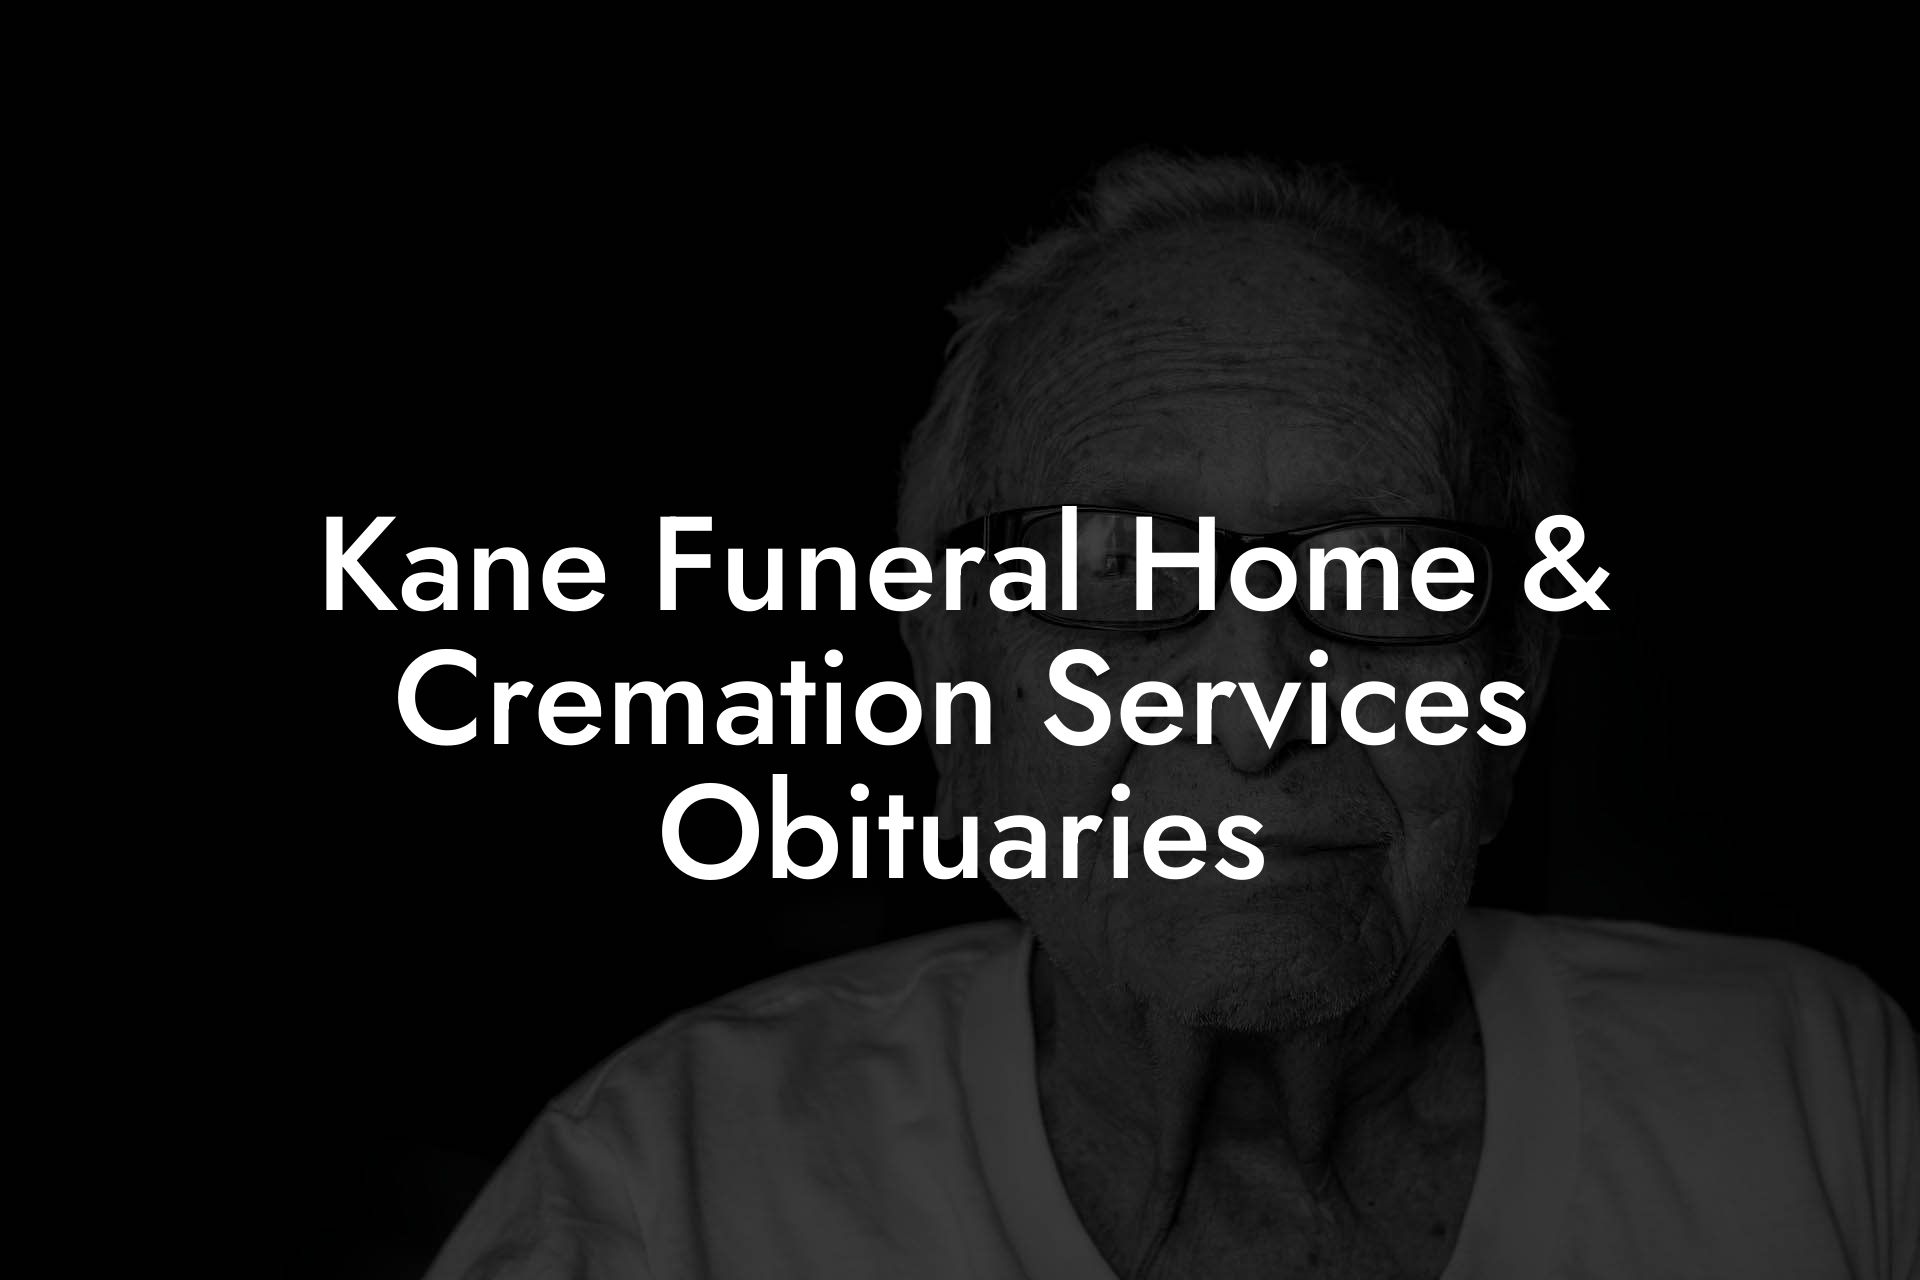 Kane Funeral Home & Cremation Services Obituaries